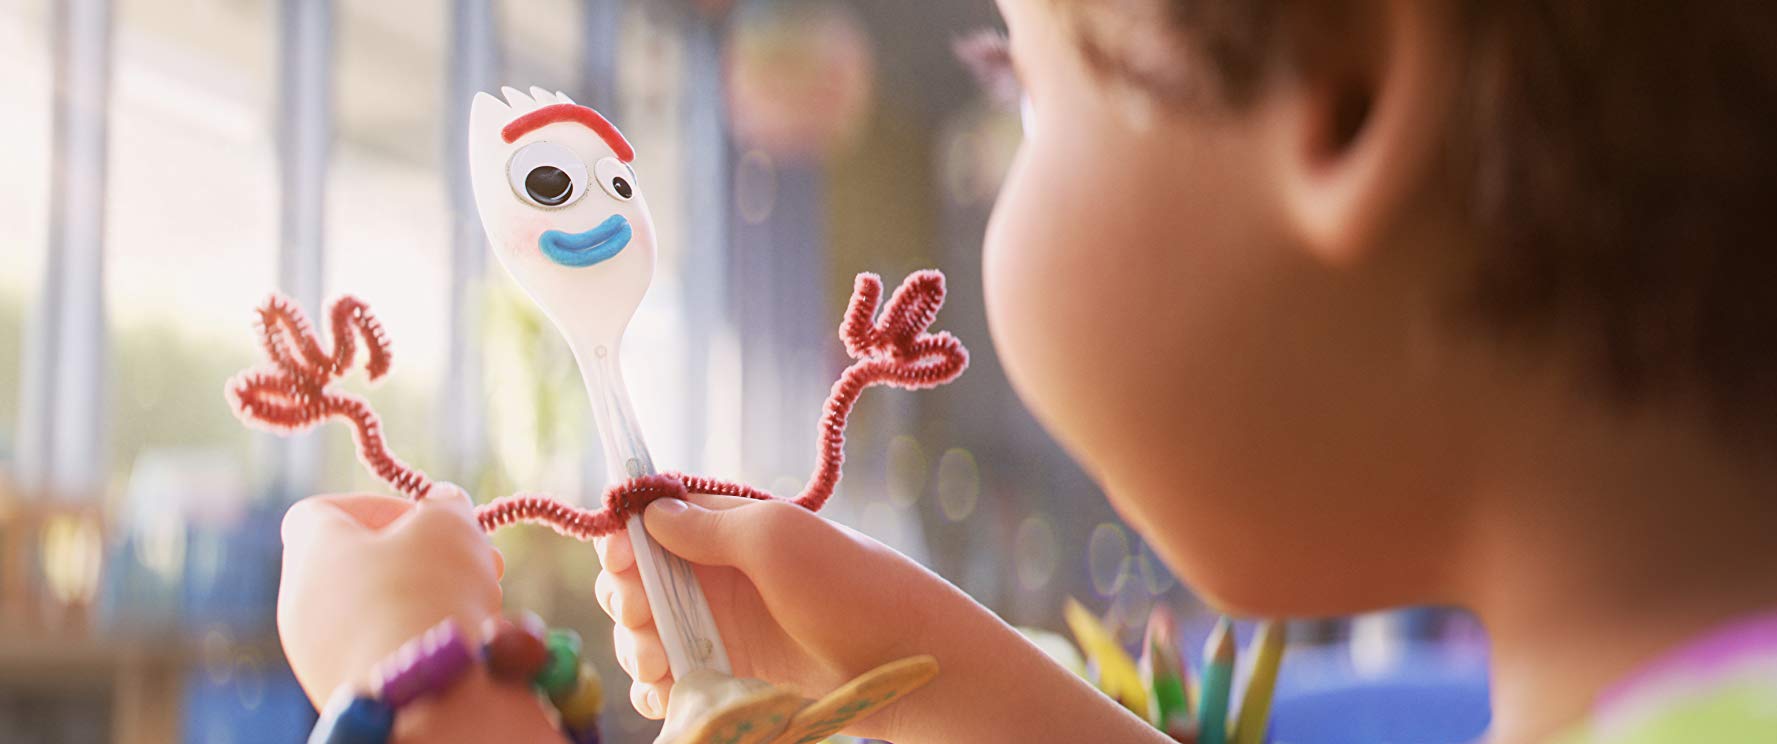 Final 'Toy Story 4' Trailer Showcases Rescue for Forky - Rotoscopers